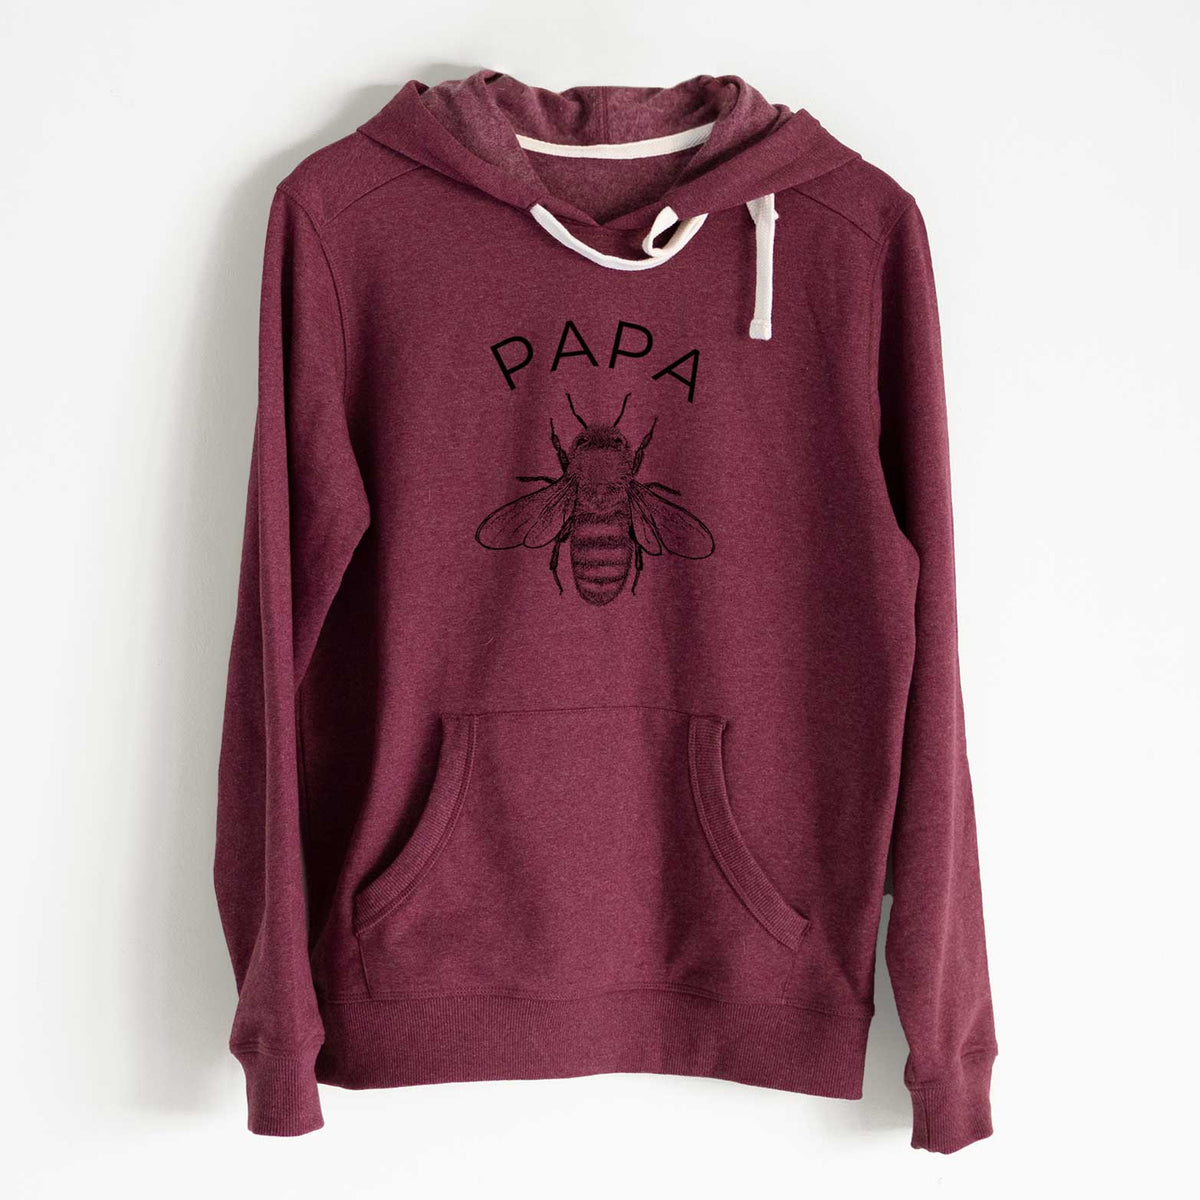 Papa Bee - Unisex Recycled Hoodie - CLOSEOUT - FINAL SALE